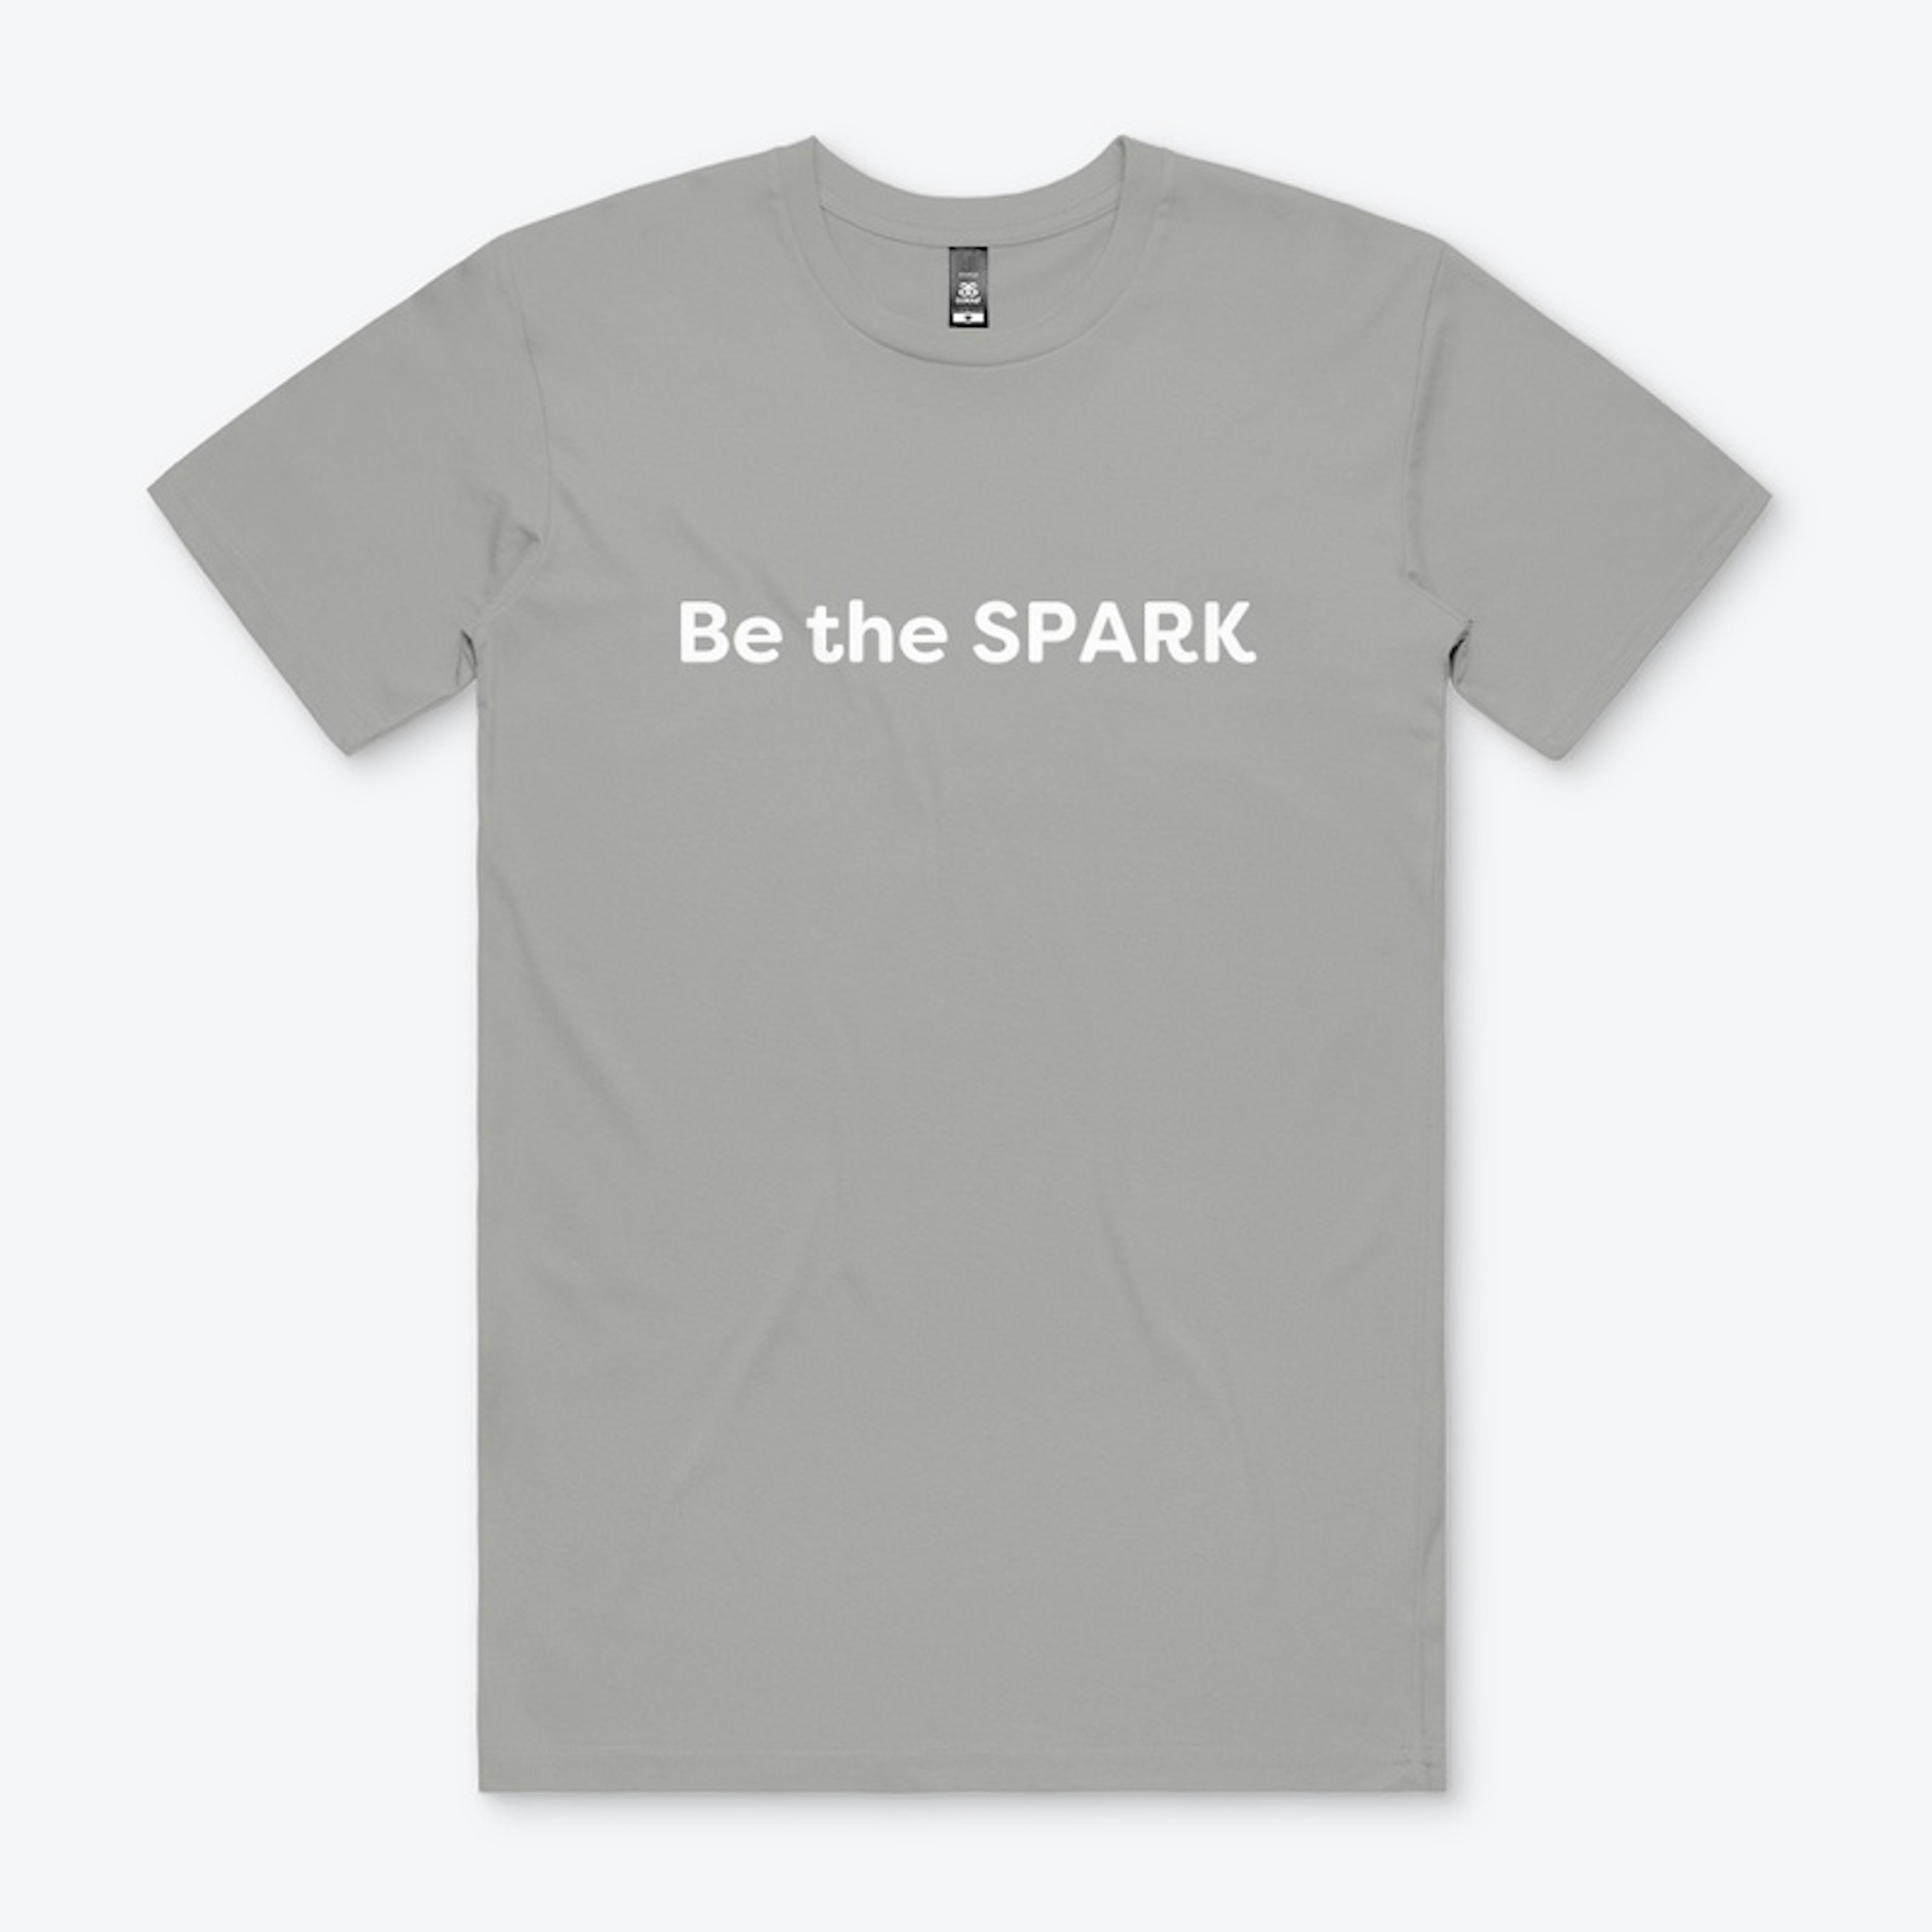 "Be the SPARK" T-Shirt